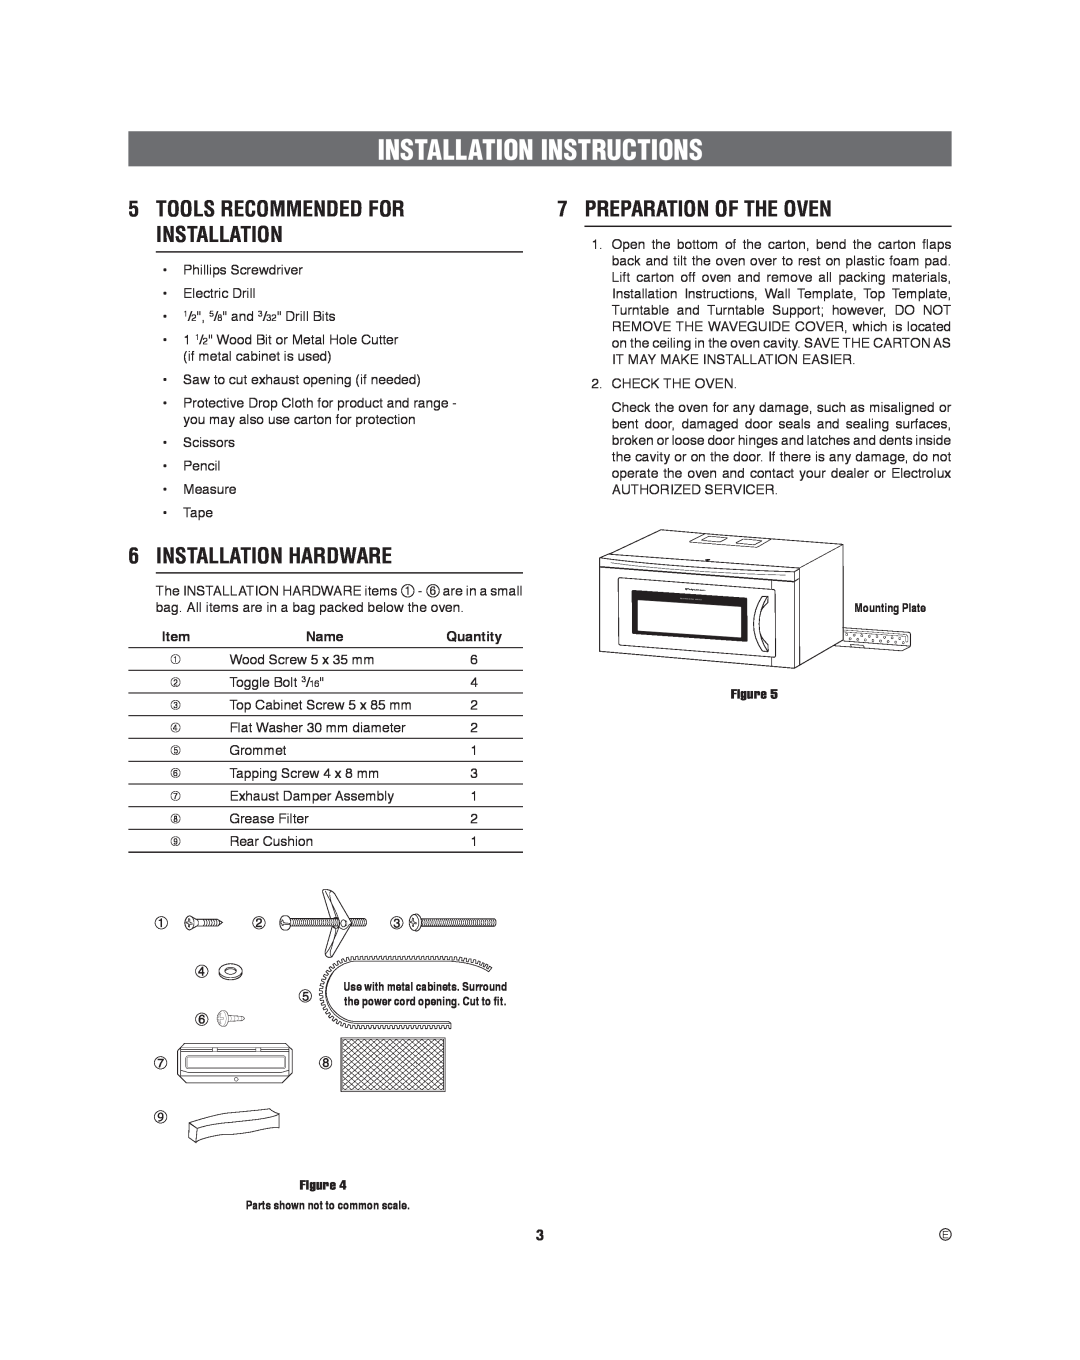 Frigidaire 316495060 Preparation Of The Oven, Installation Hardware, Tools Recommended For Installation, Name, Quantity 